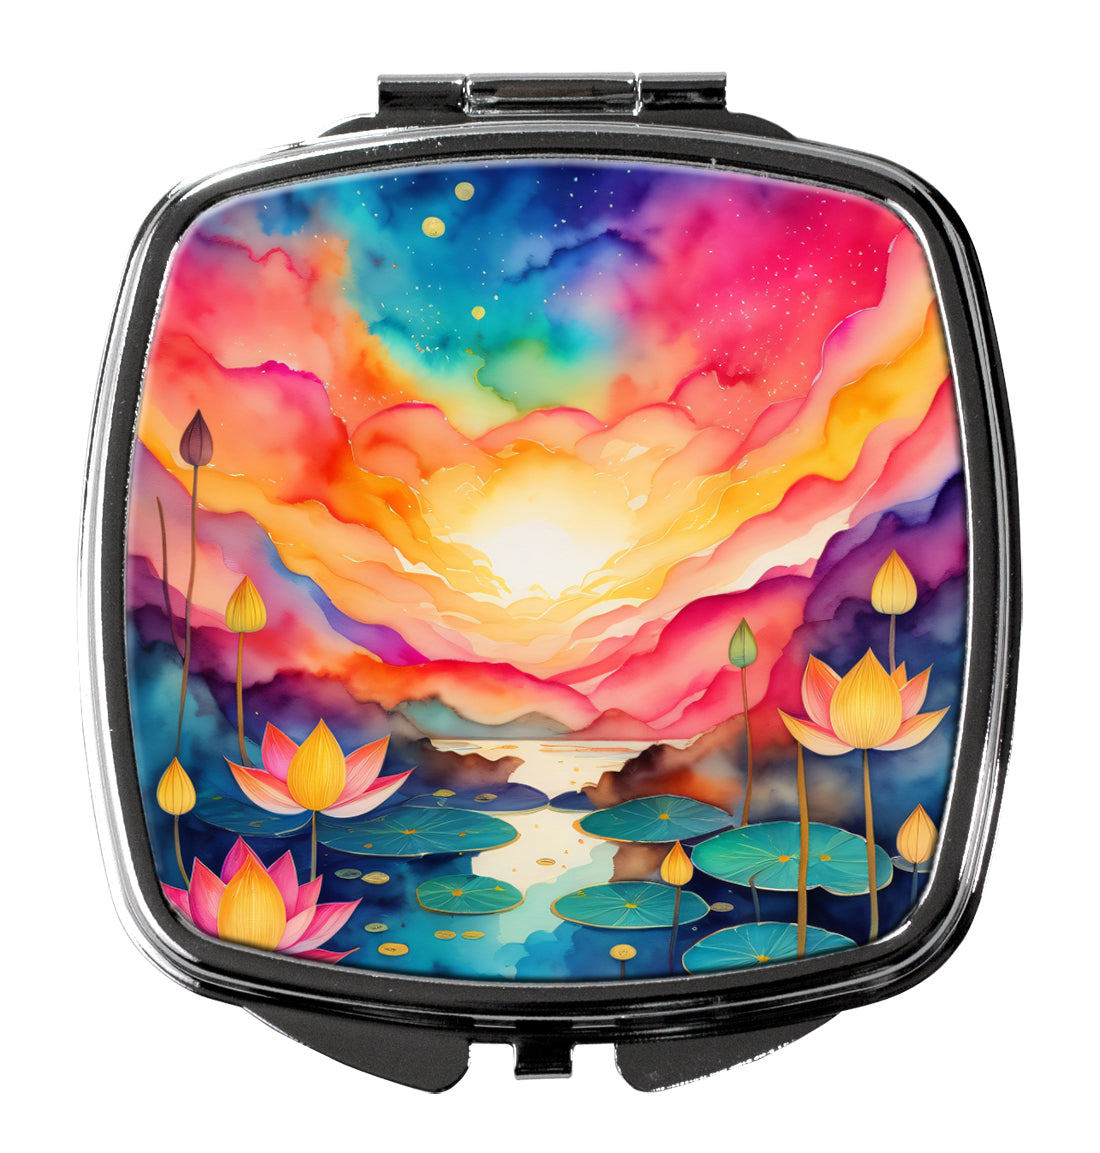 Buy this Colorful Lotus Compact Mirror